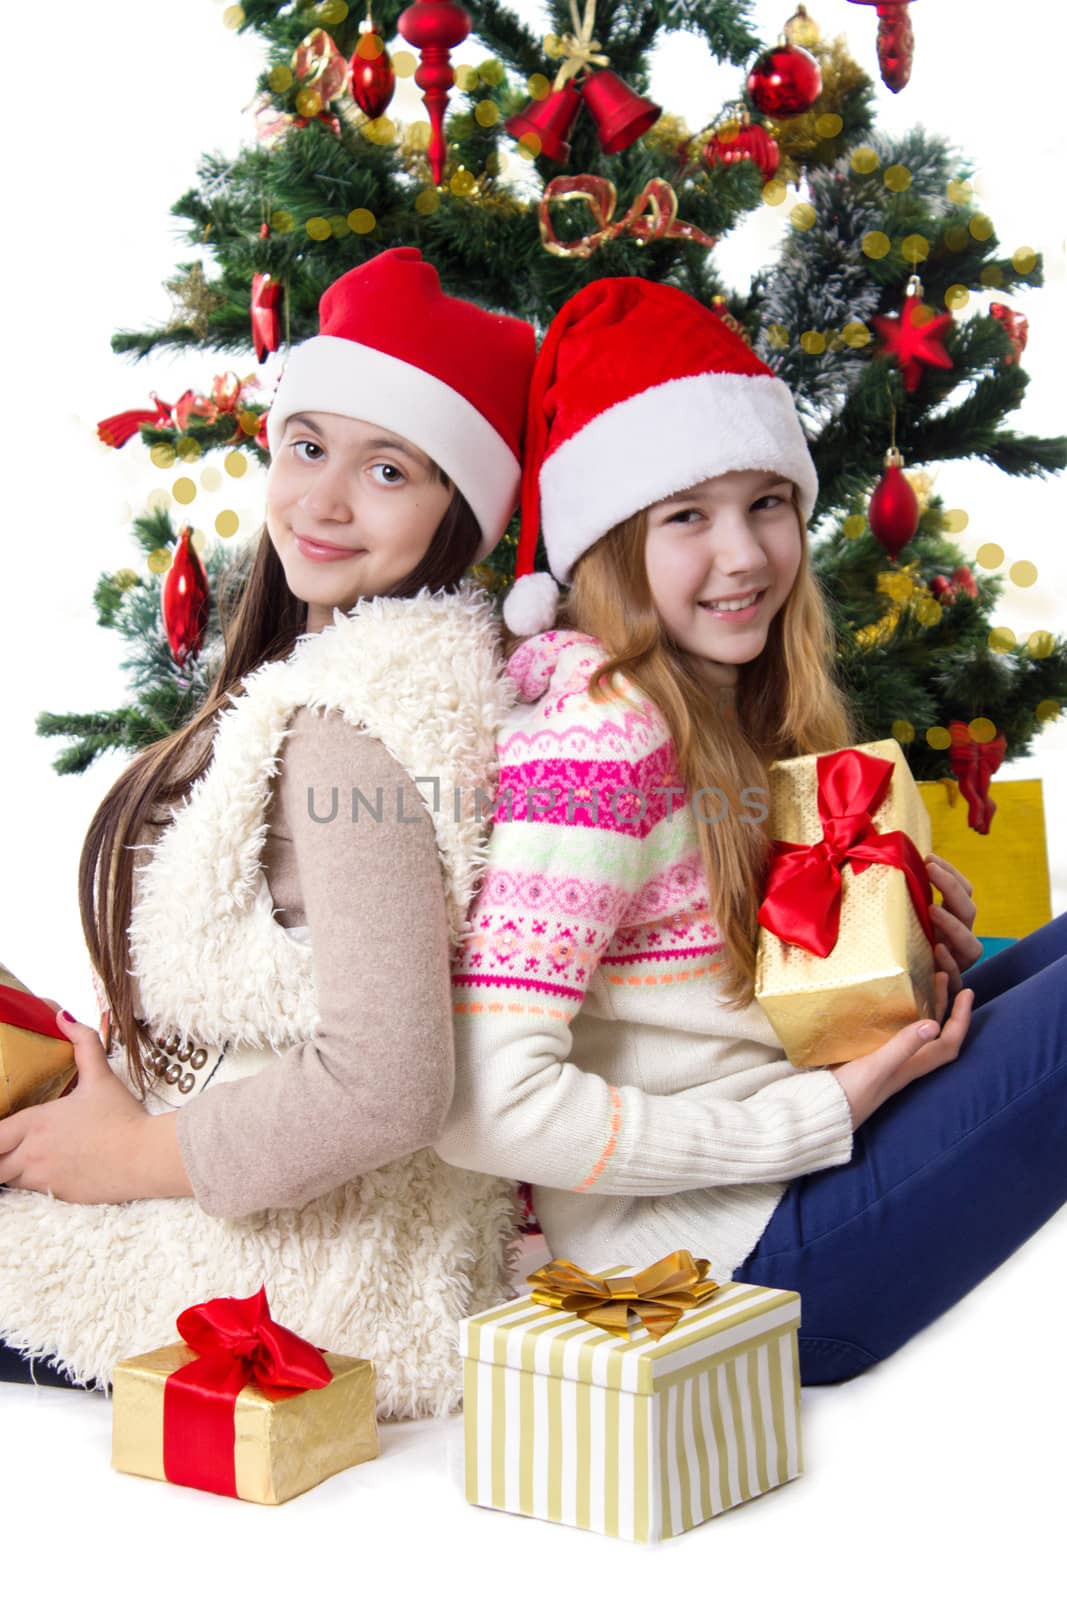 Sisters with gifts under Christmas tree by Angel_a